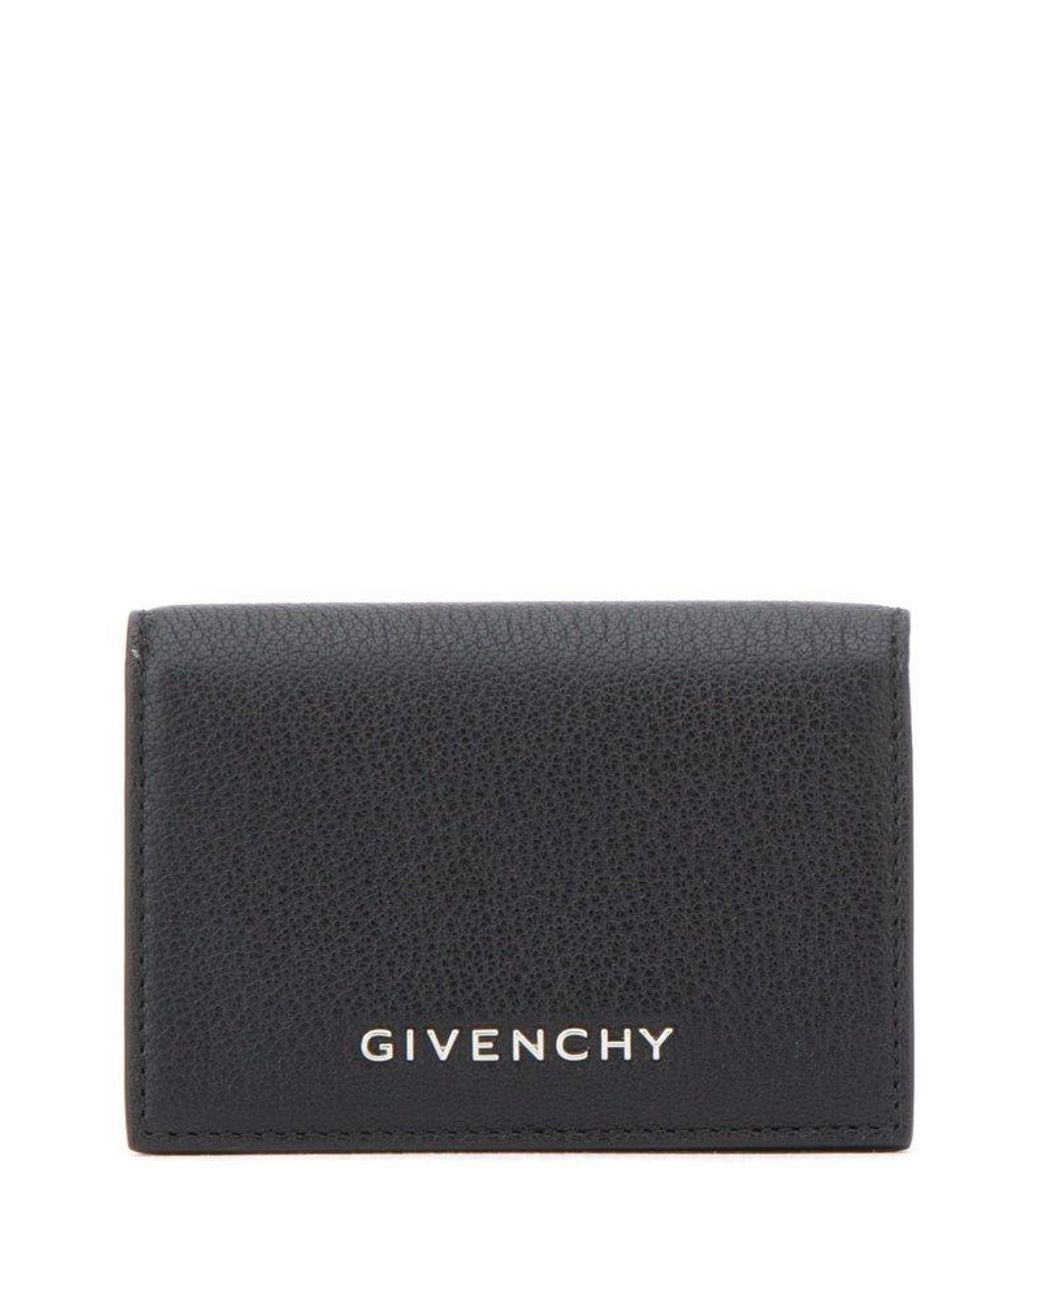 Givenchy Logo Detailed Bi-fold Wallet in Gray | Lyst